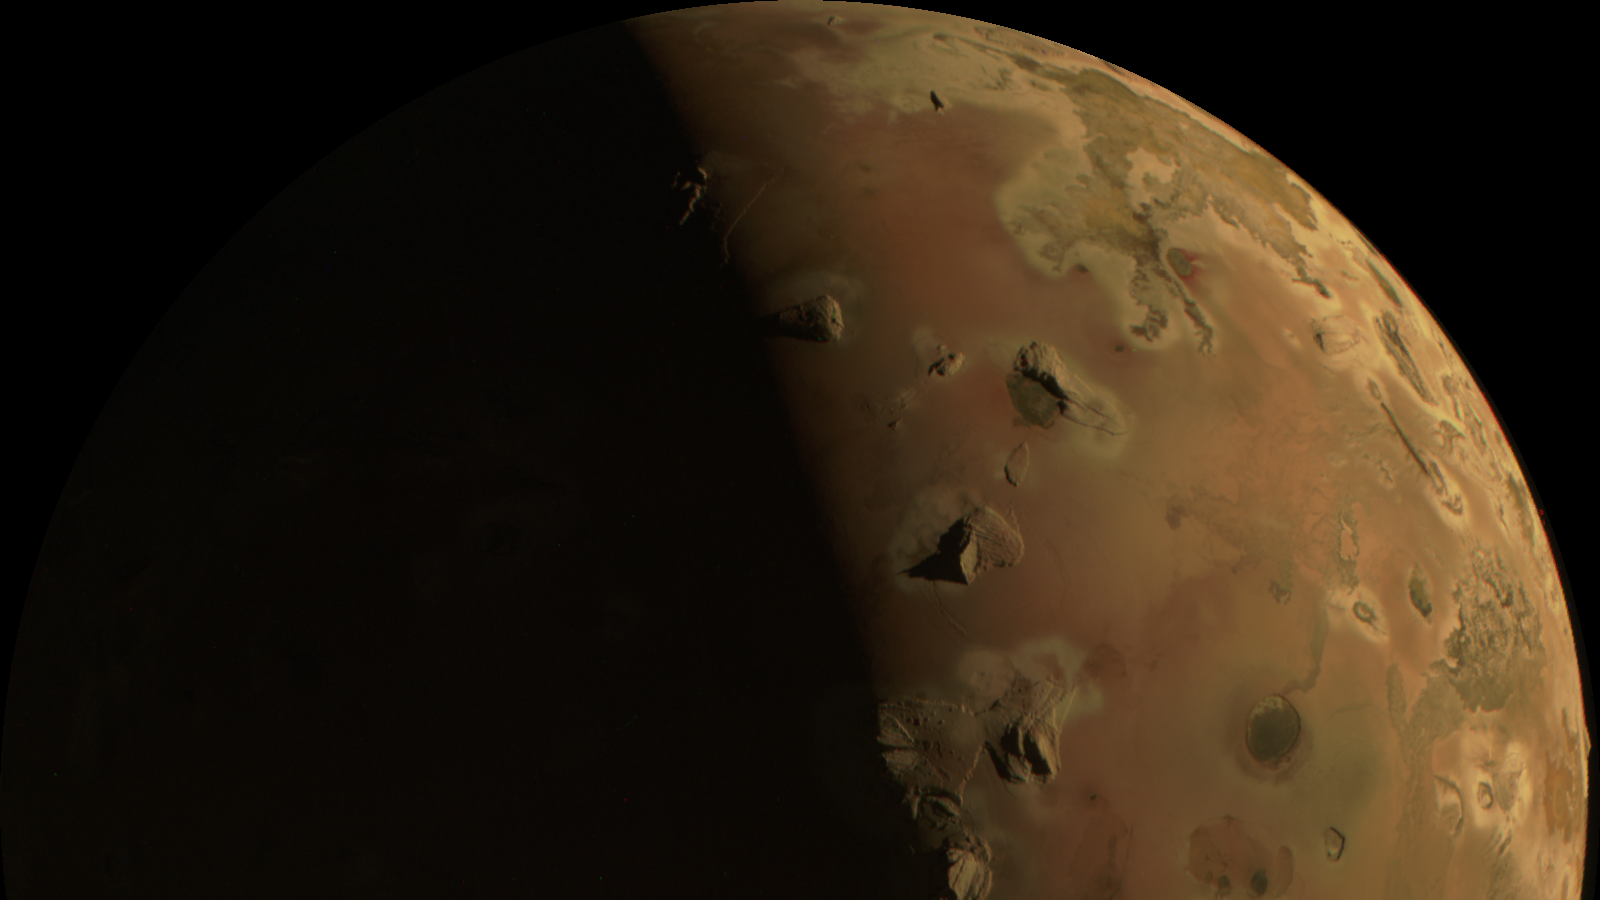 Take a look at these astonishing new images of Jupiter’s volcanic moon Io